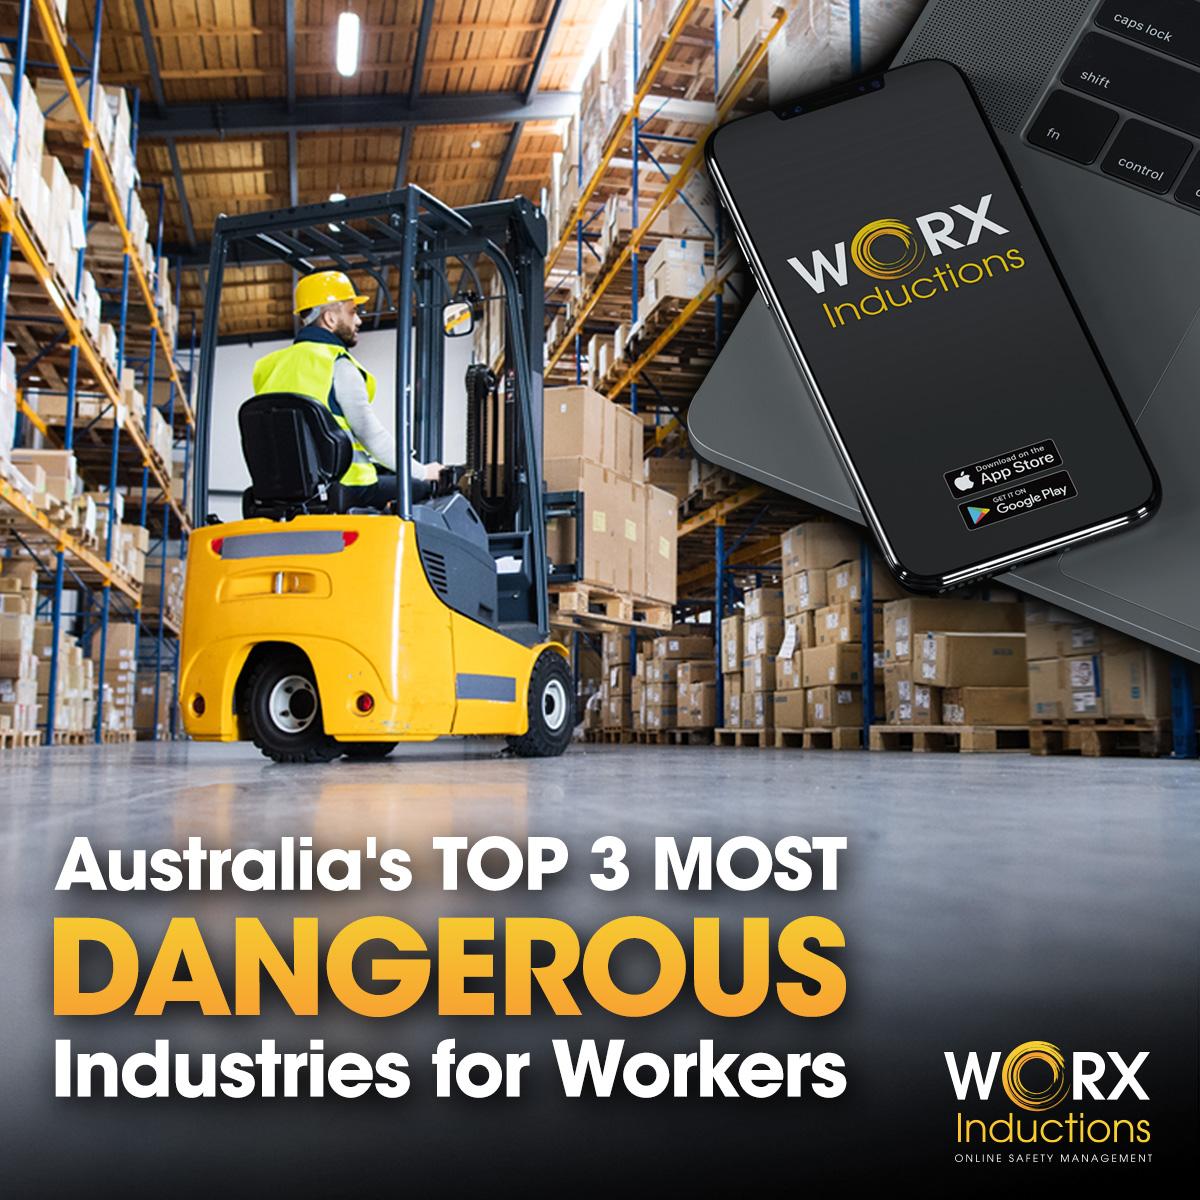 Australia's Top 3 Most Dangerous Industries for Workers